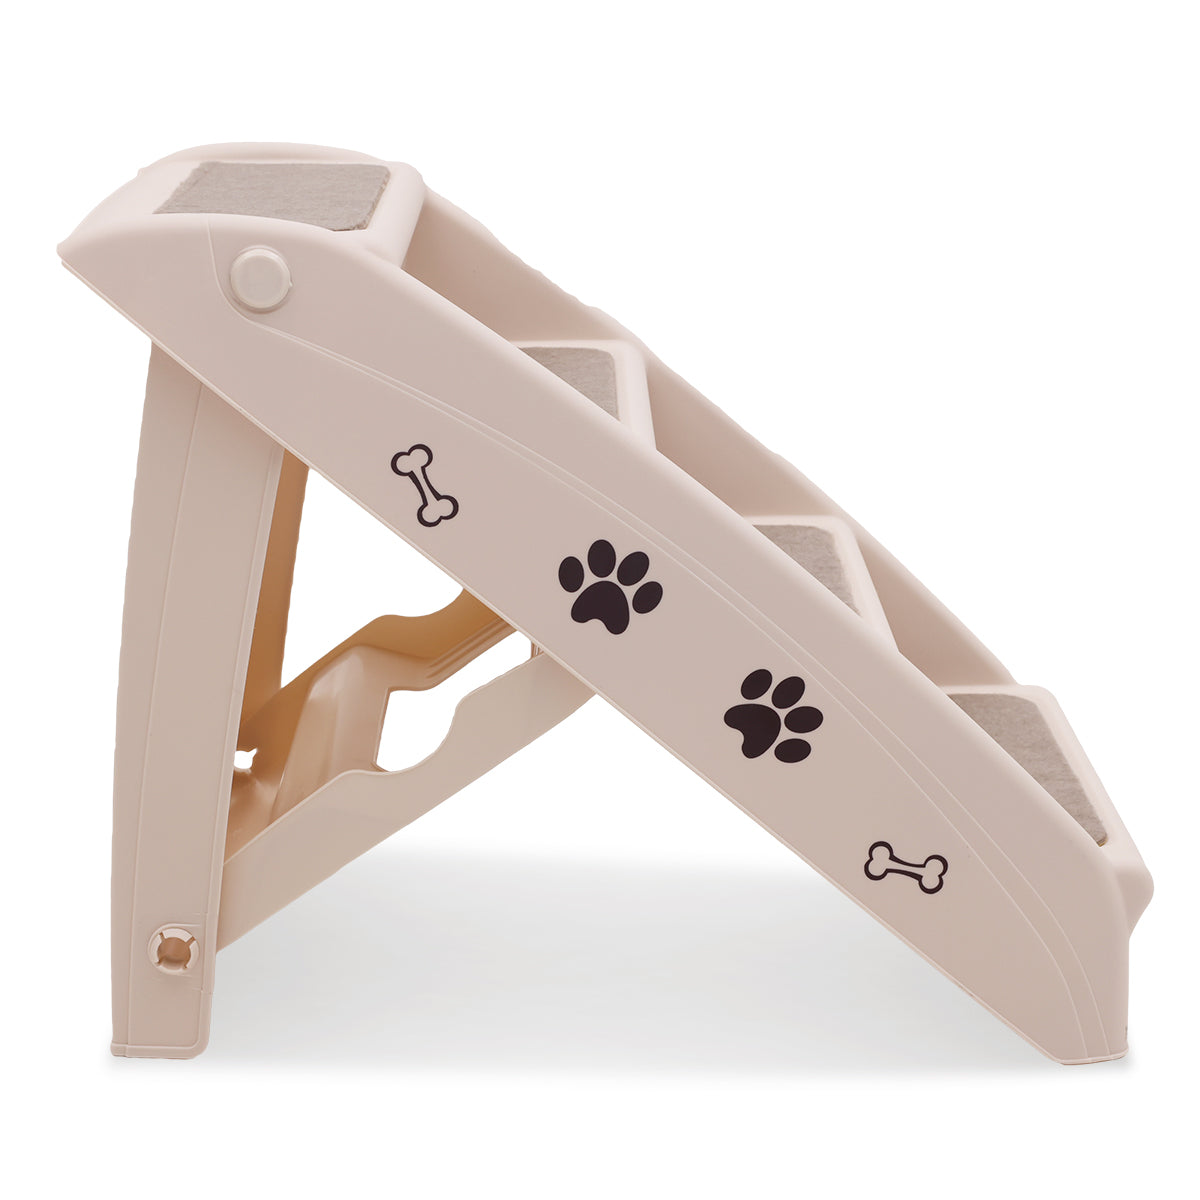 Furtastic 50cm Foldable Step Ladder Stairs Petsby | Pet Essentials